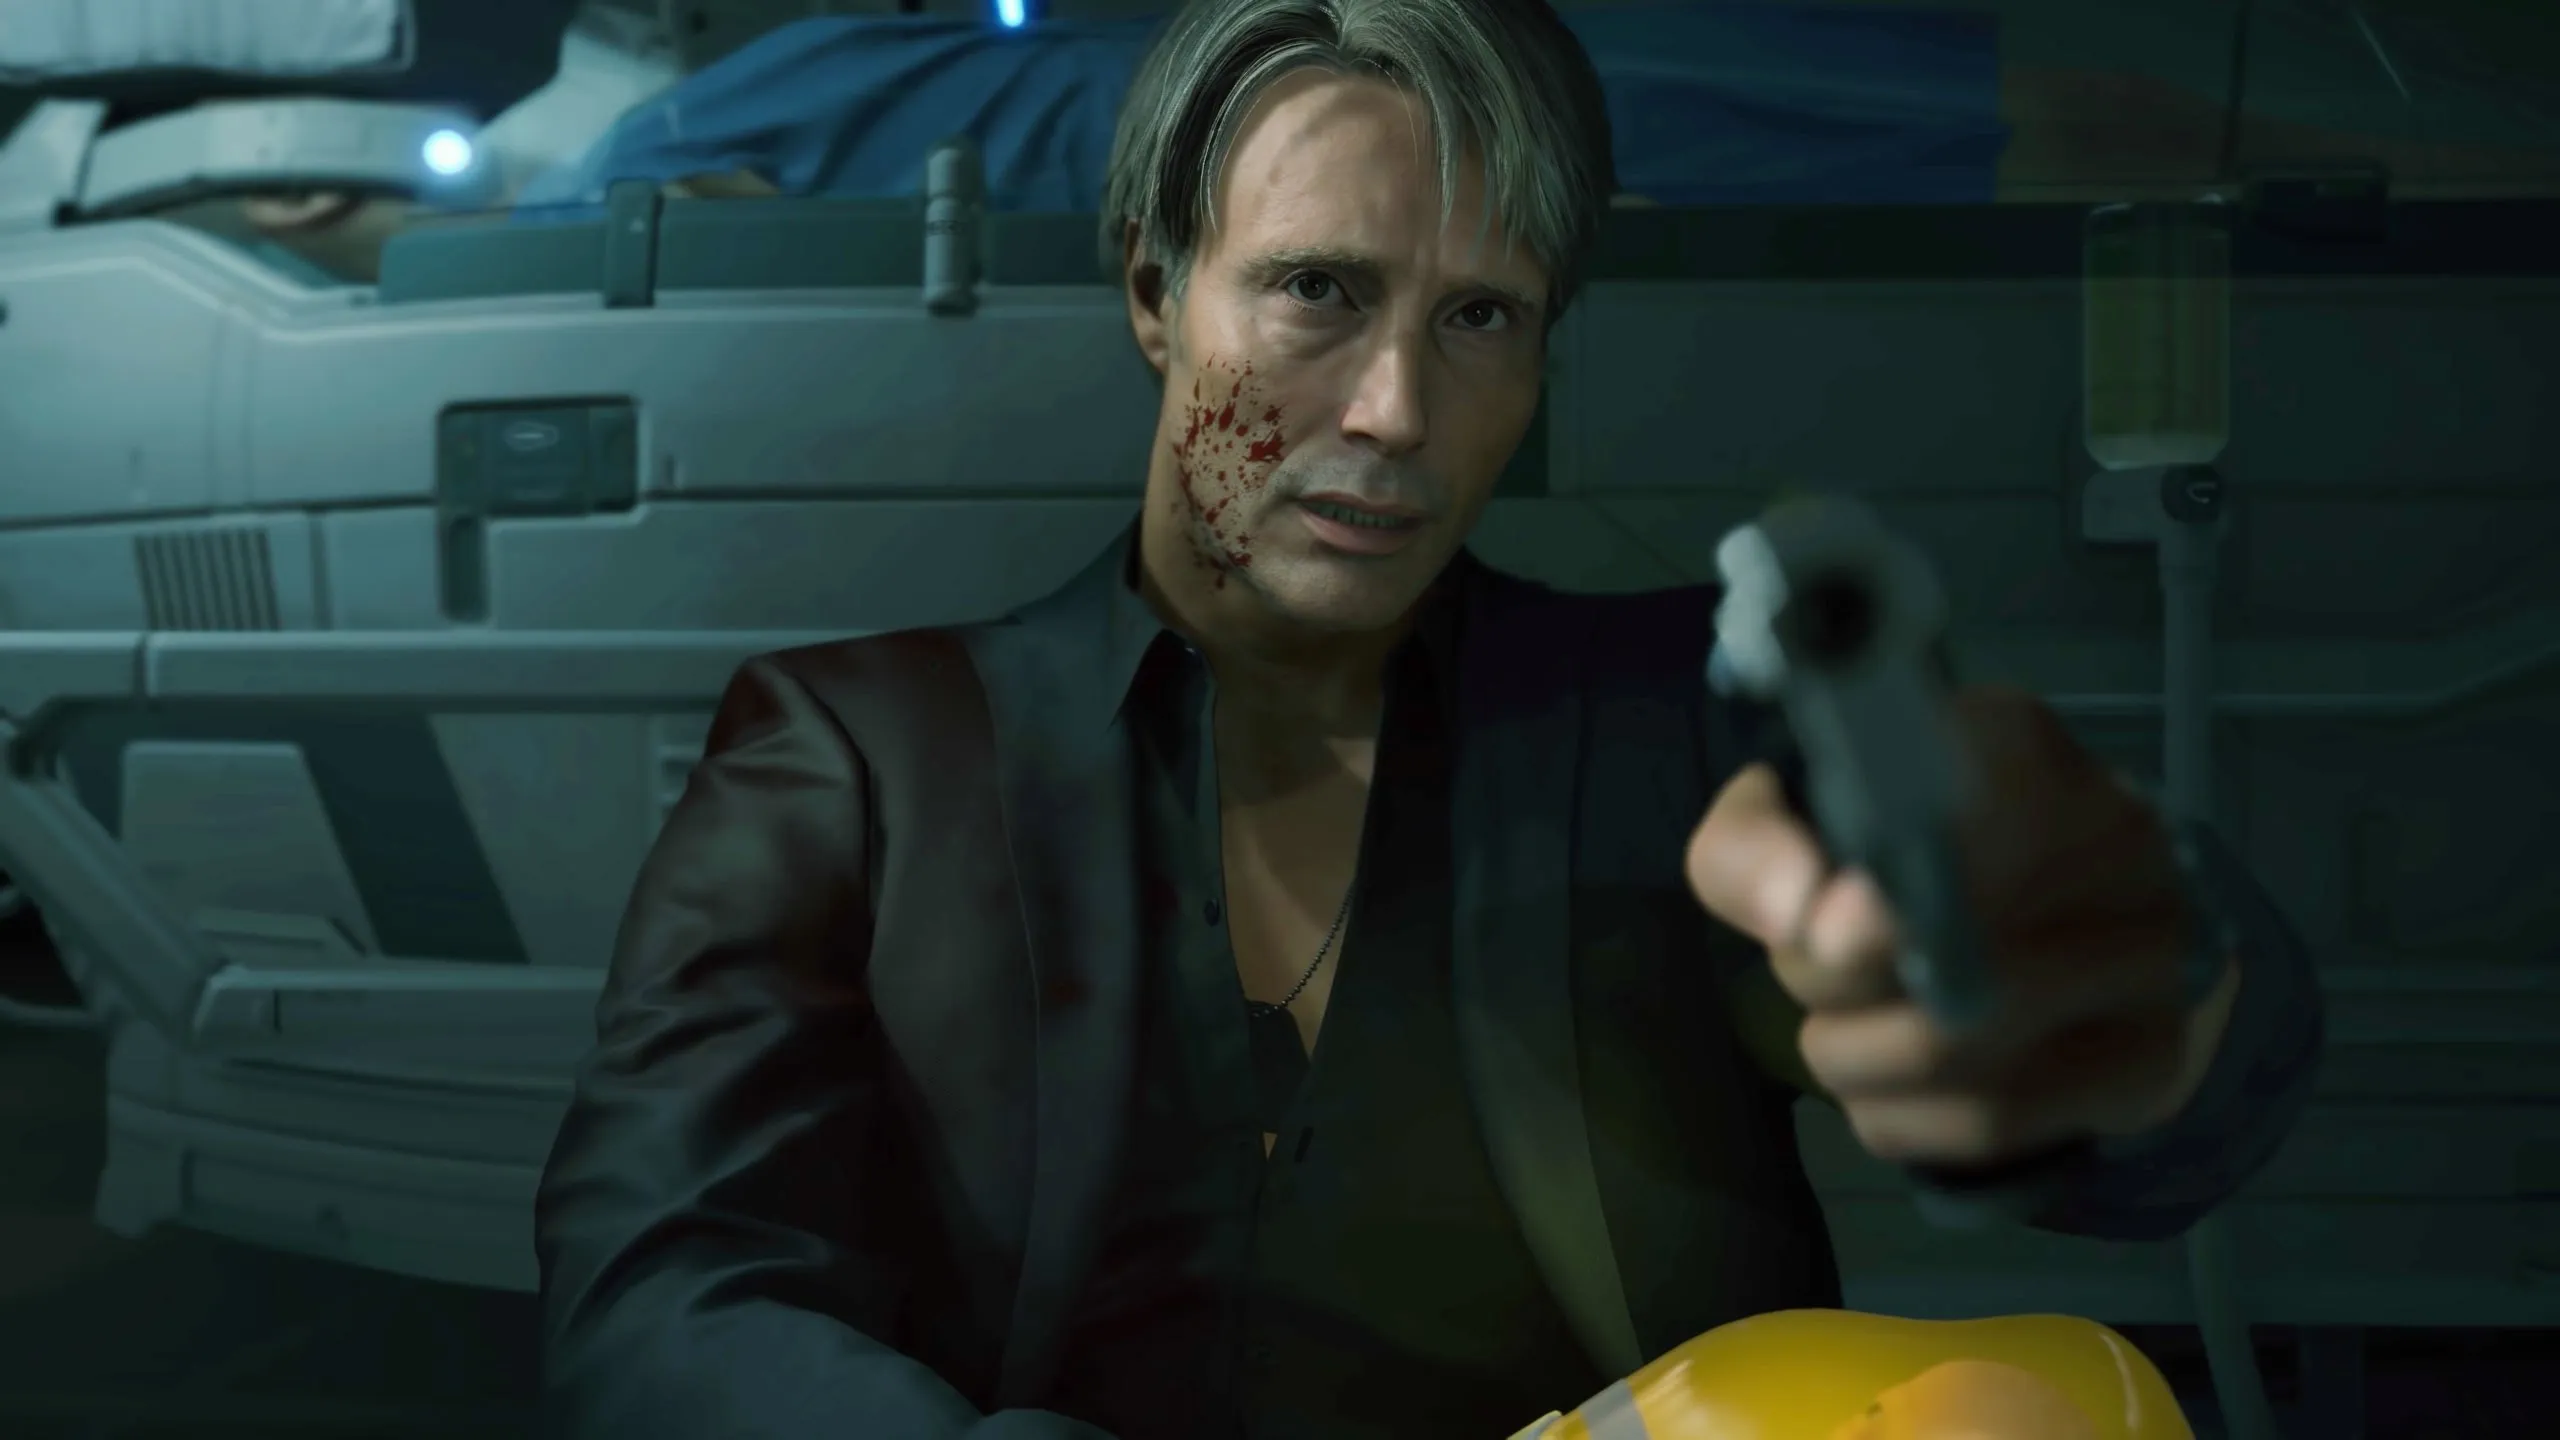 Game Review: 'Death Stranding' Is 2019's Most Ambitious Game